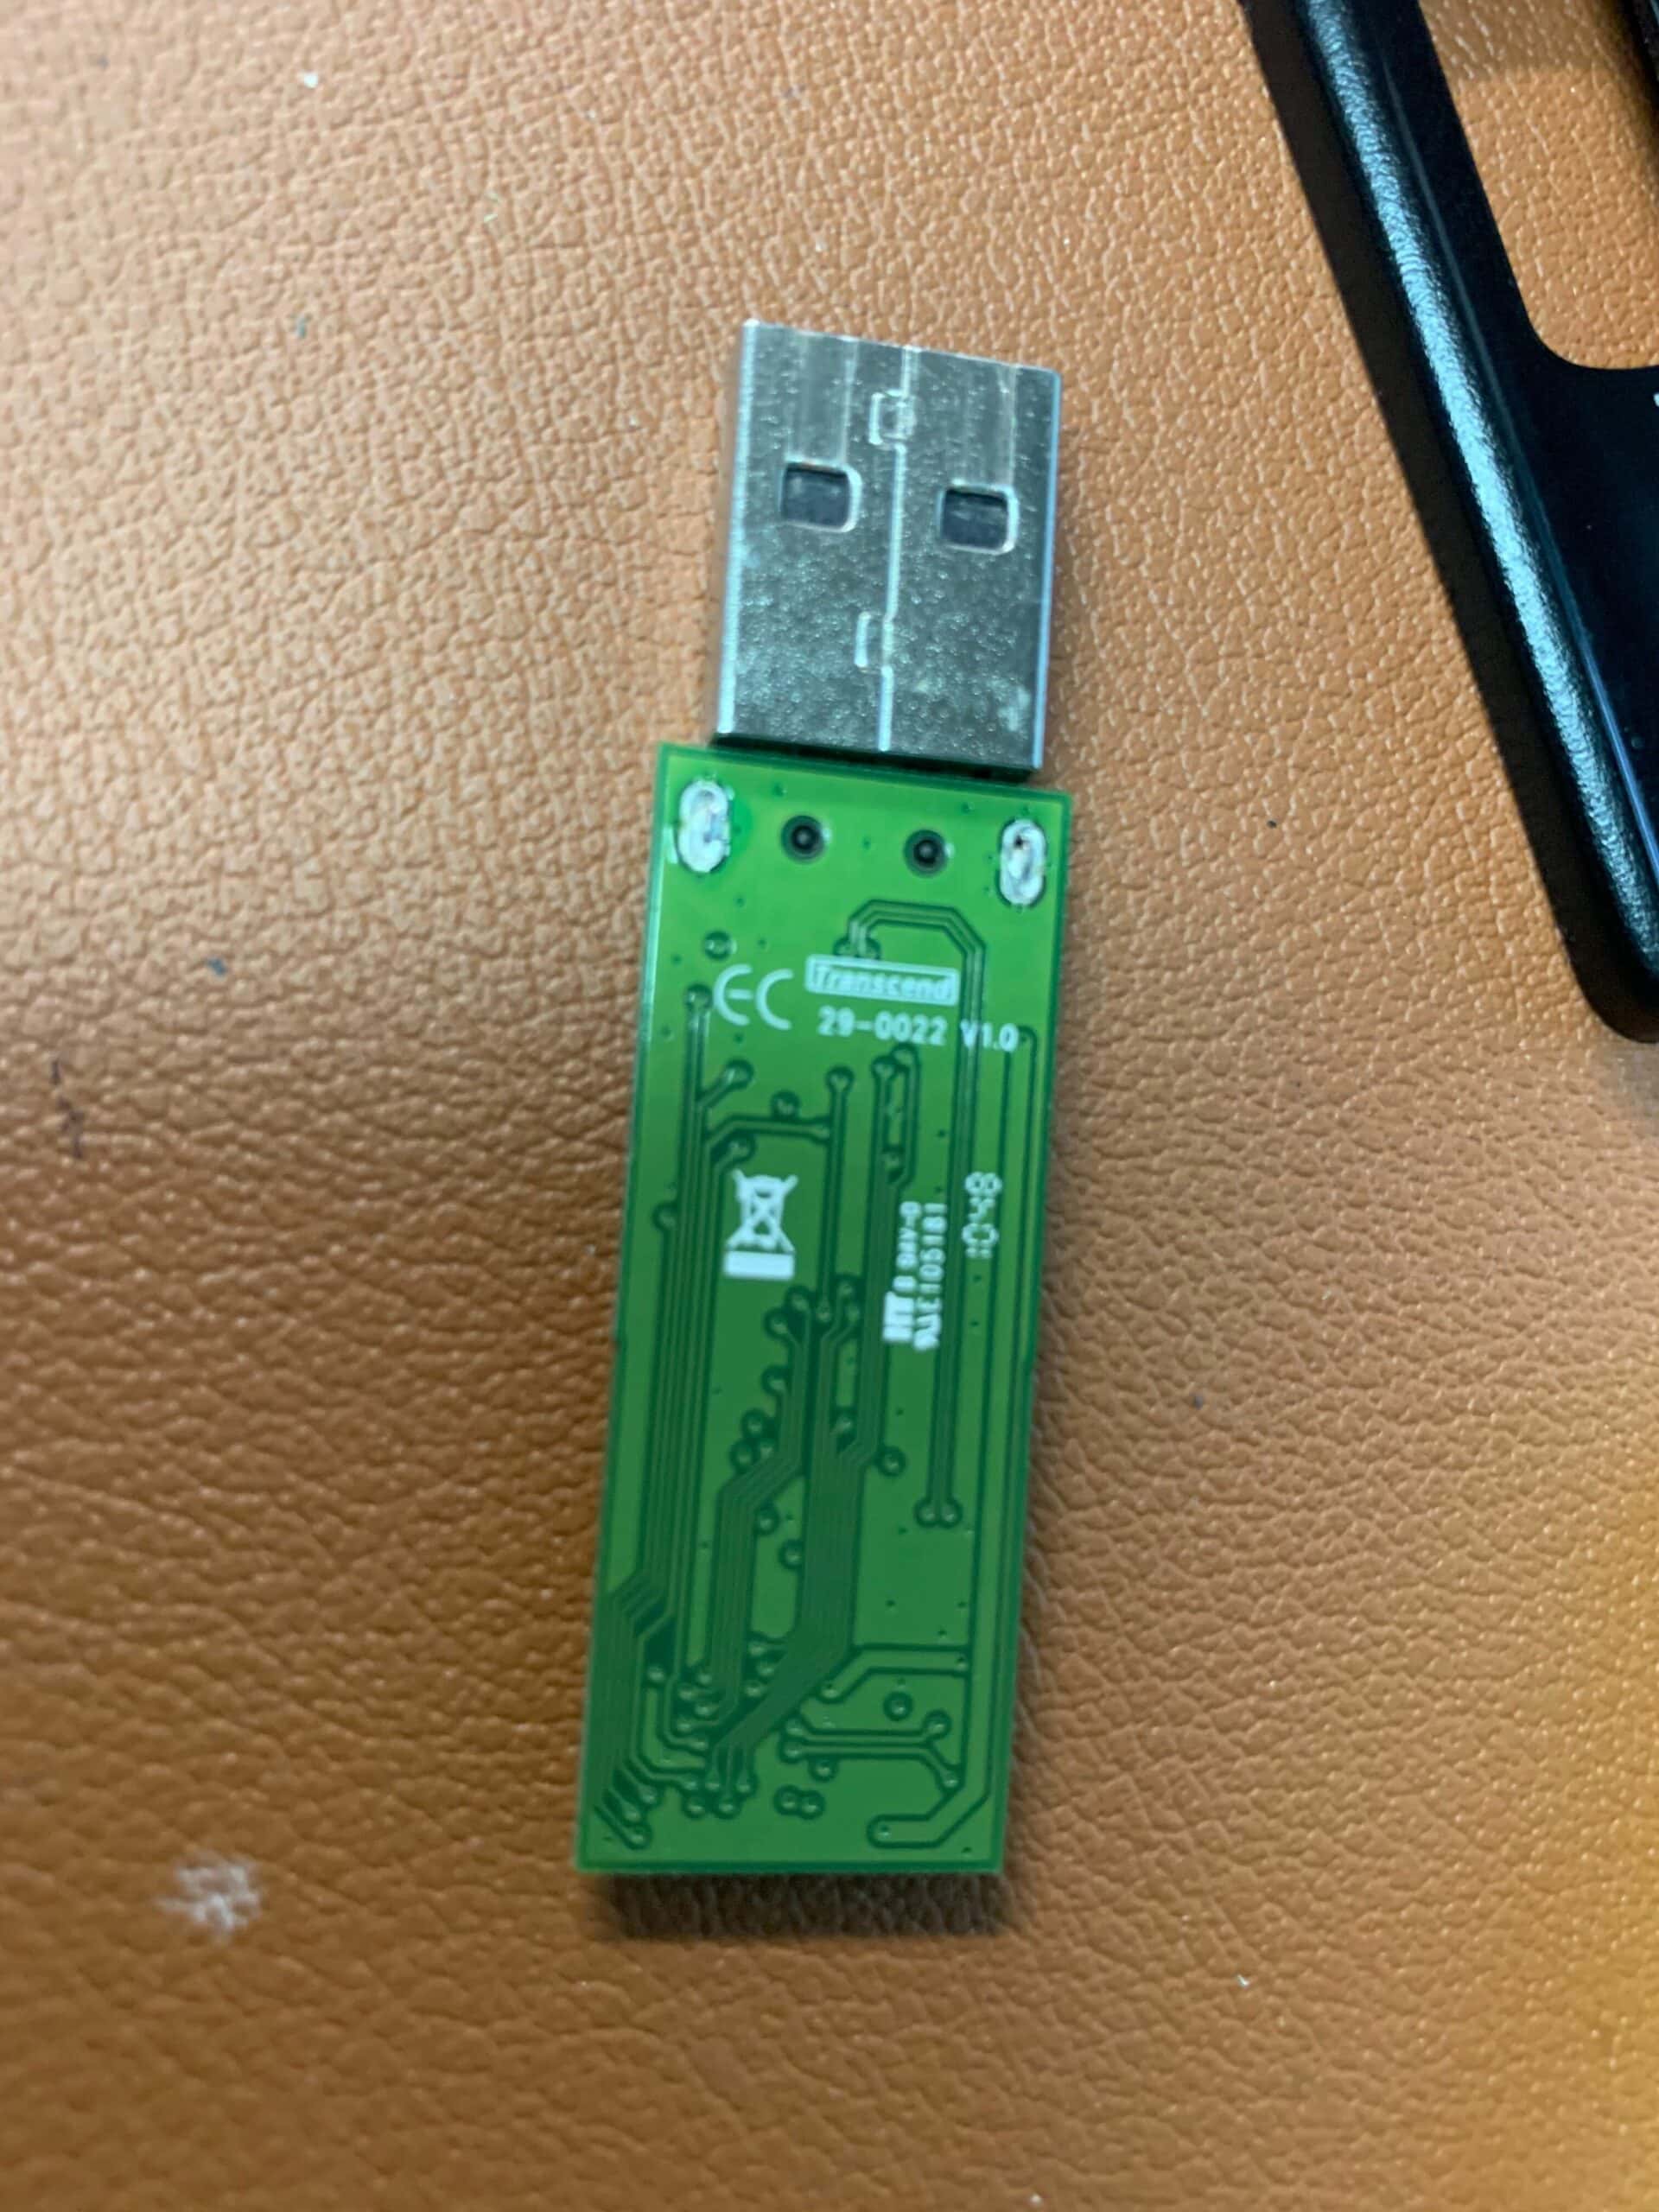 PCB of flash drive data recovery